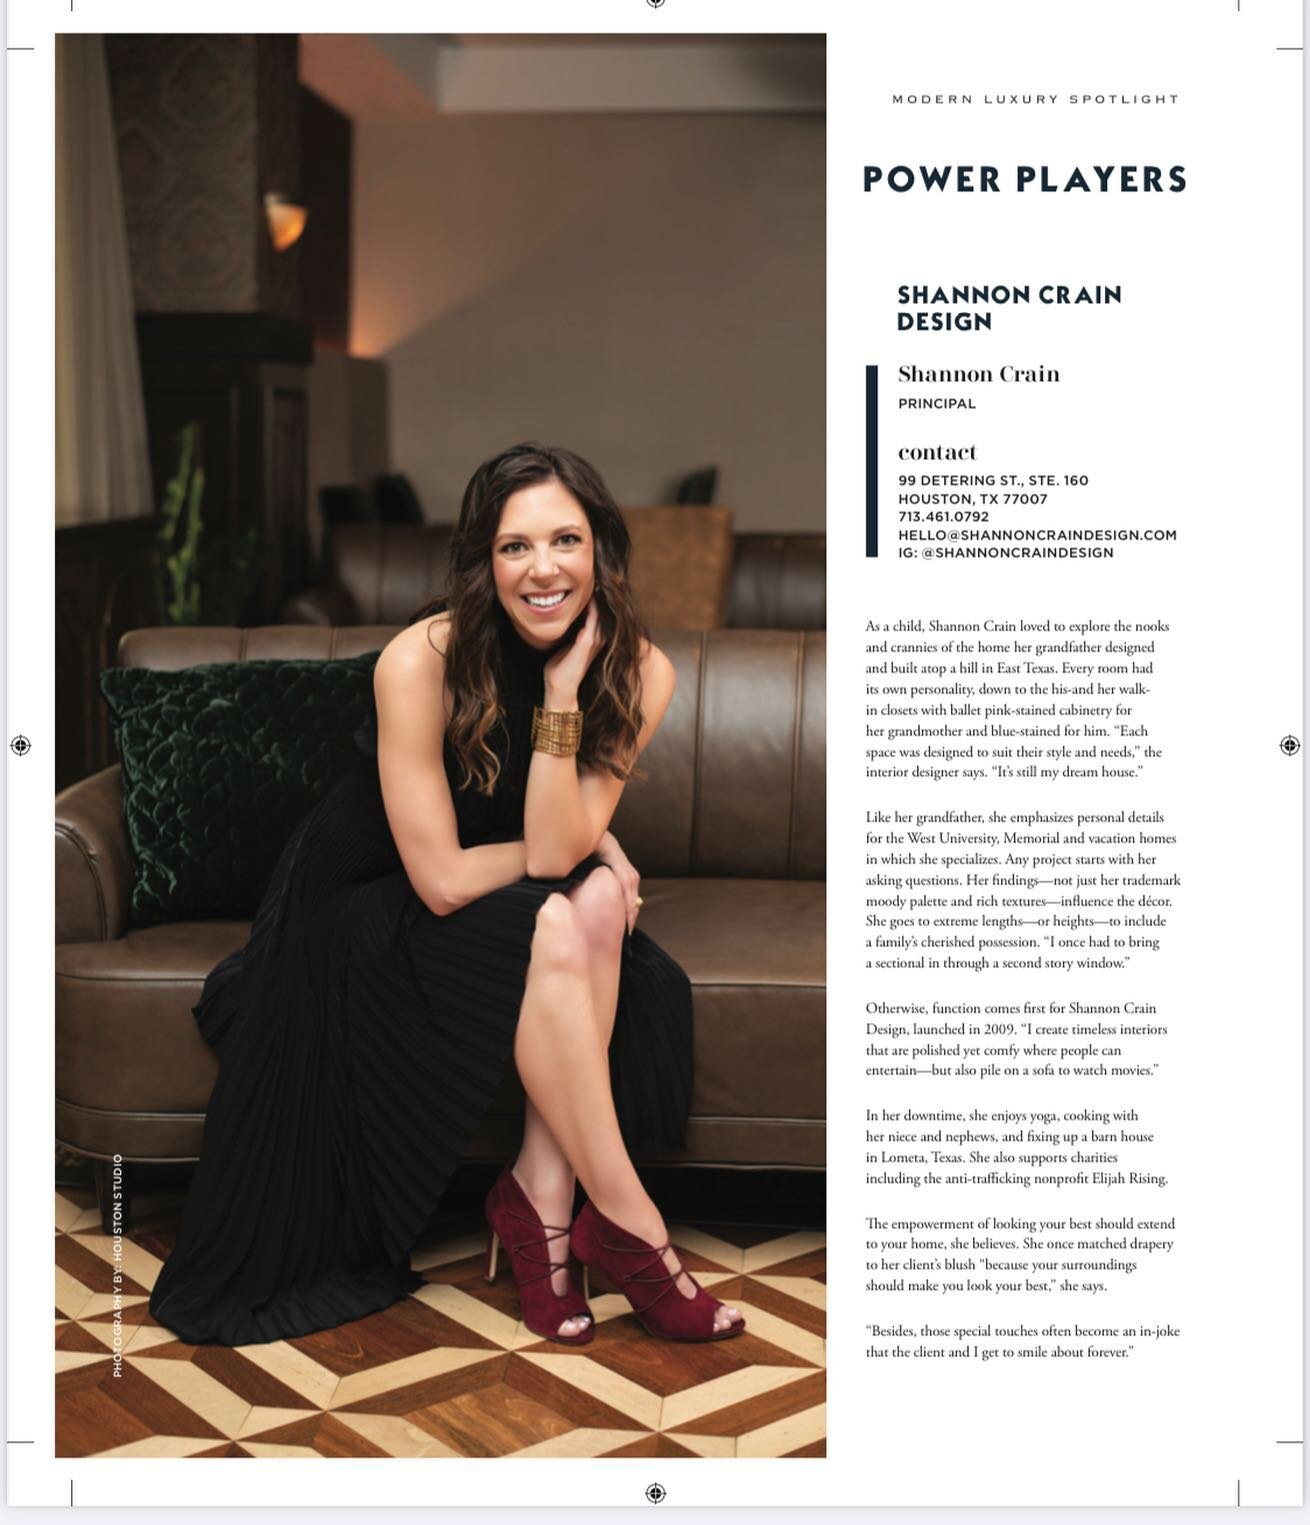 Smiling bc it&rsquo;s Friday, but mostly bc I&rsquo;m extremely honored to be included in the @modernluxury &ldquo;Power Players&rdquo;! If you&rsquo;re new here, welcome to SCDesign!💪🏼🖤⚡️photo: @houstonstudioinc styling: @simonsayssaks makeup/hai